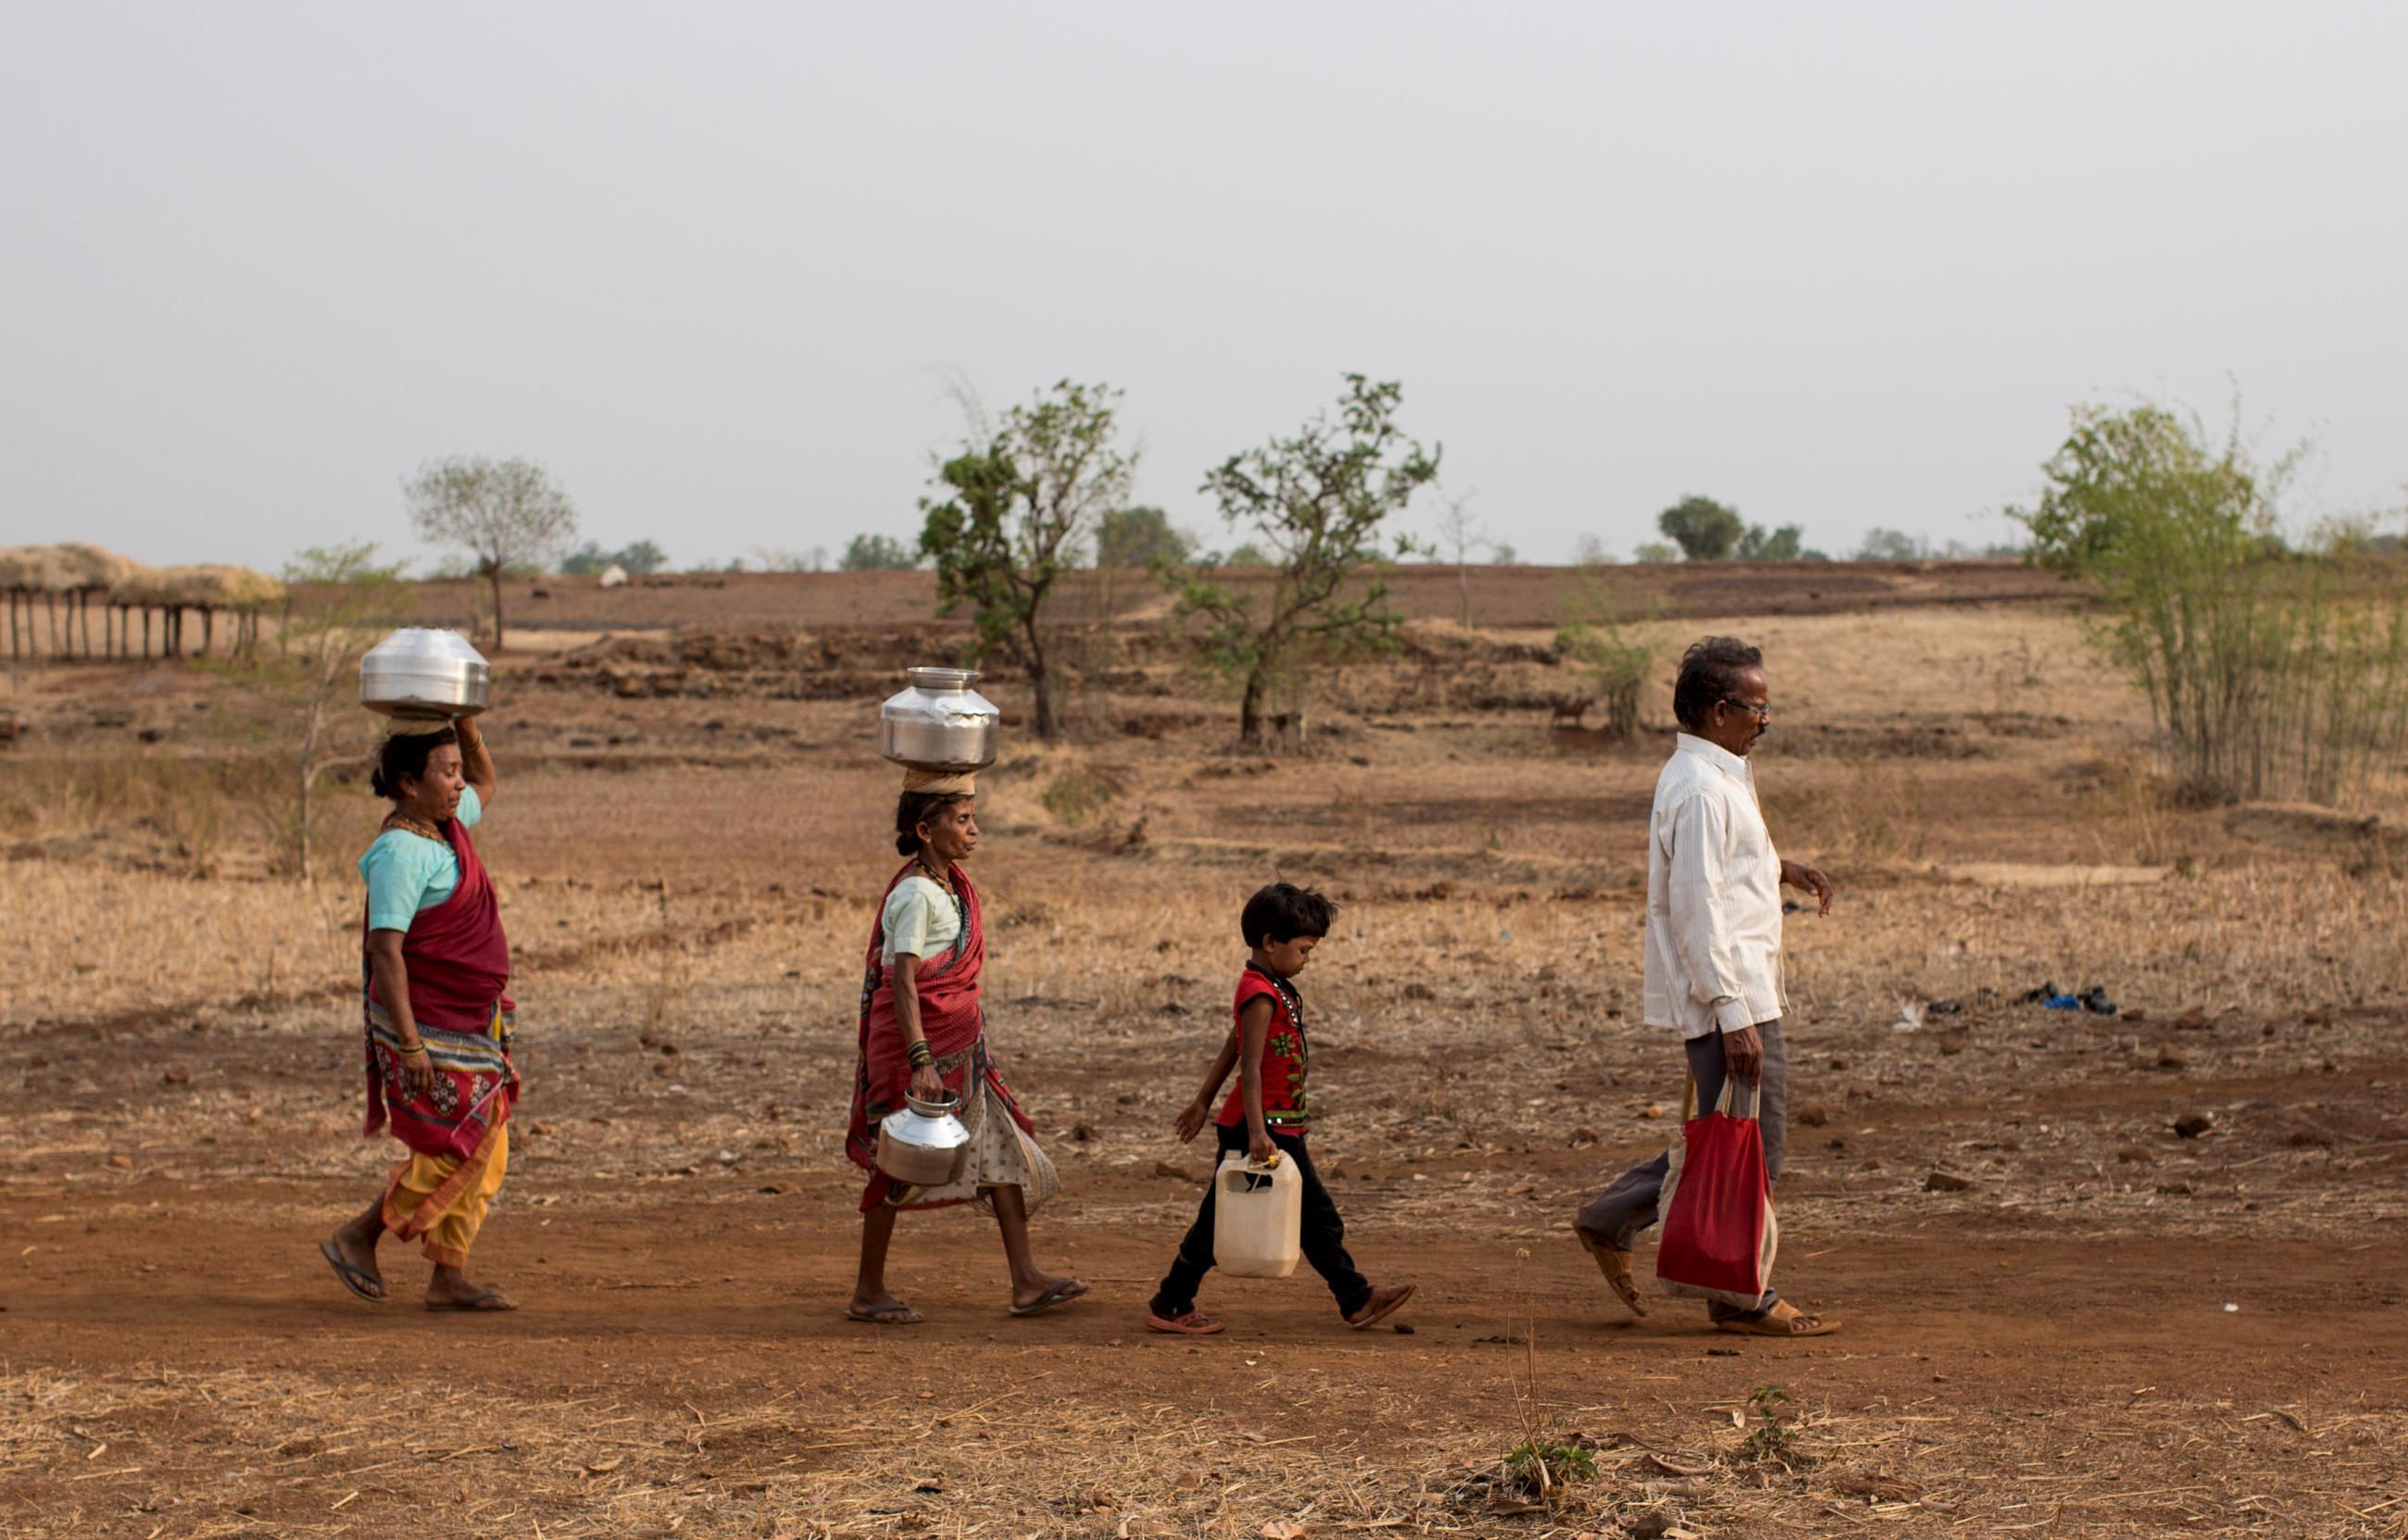 DOCUMENT DATE:  June 04, 2015  Bhaagi (left) and Sakhri (second from left), wives of Sakharam Bhagat (right) walk to fetch water from a well outside Denganmal village, Maharashtra, India, on April 20, 2015